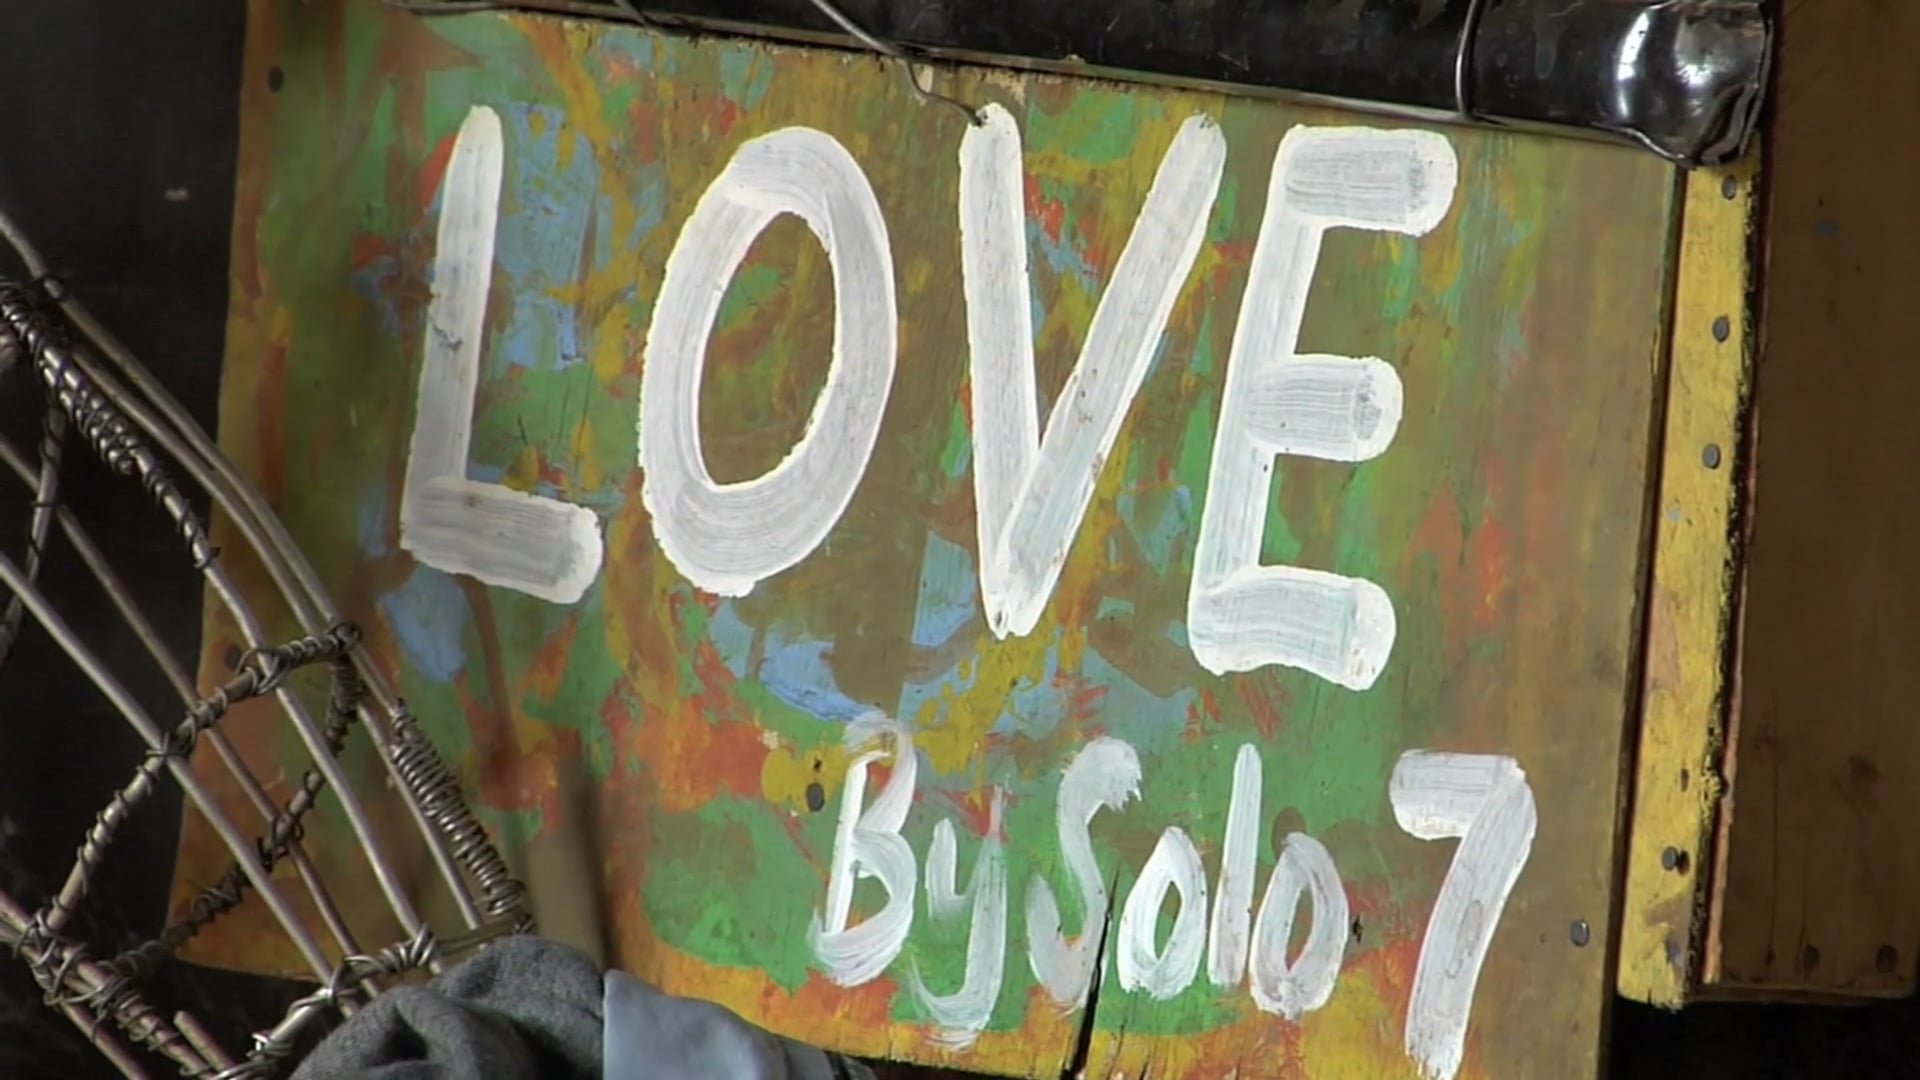 A poster saying LOVE by Solo7 with colorful paint behind it.